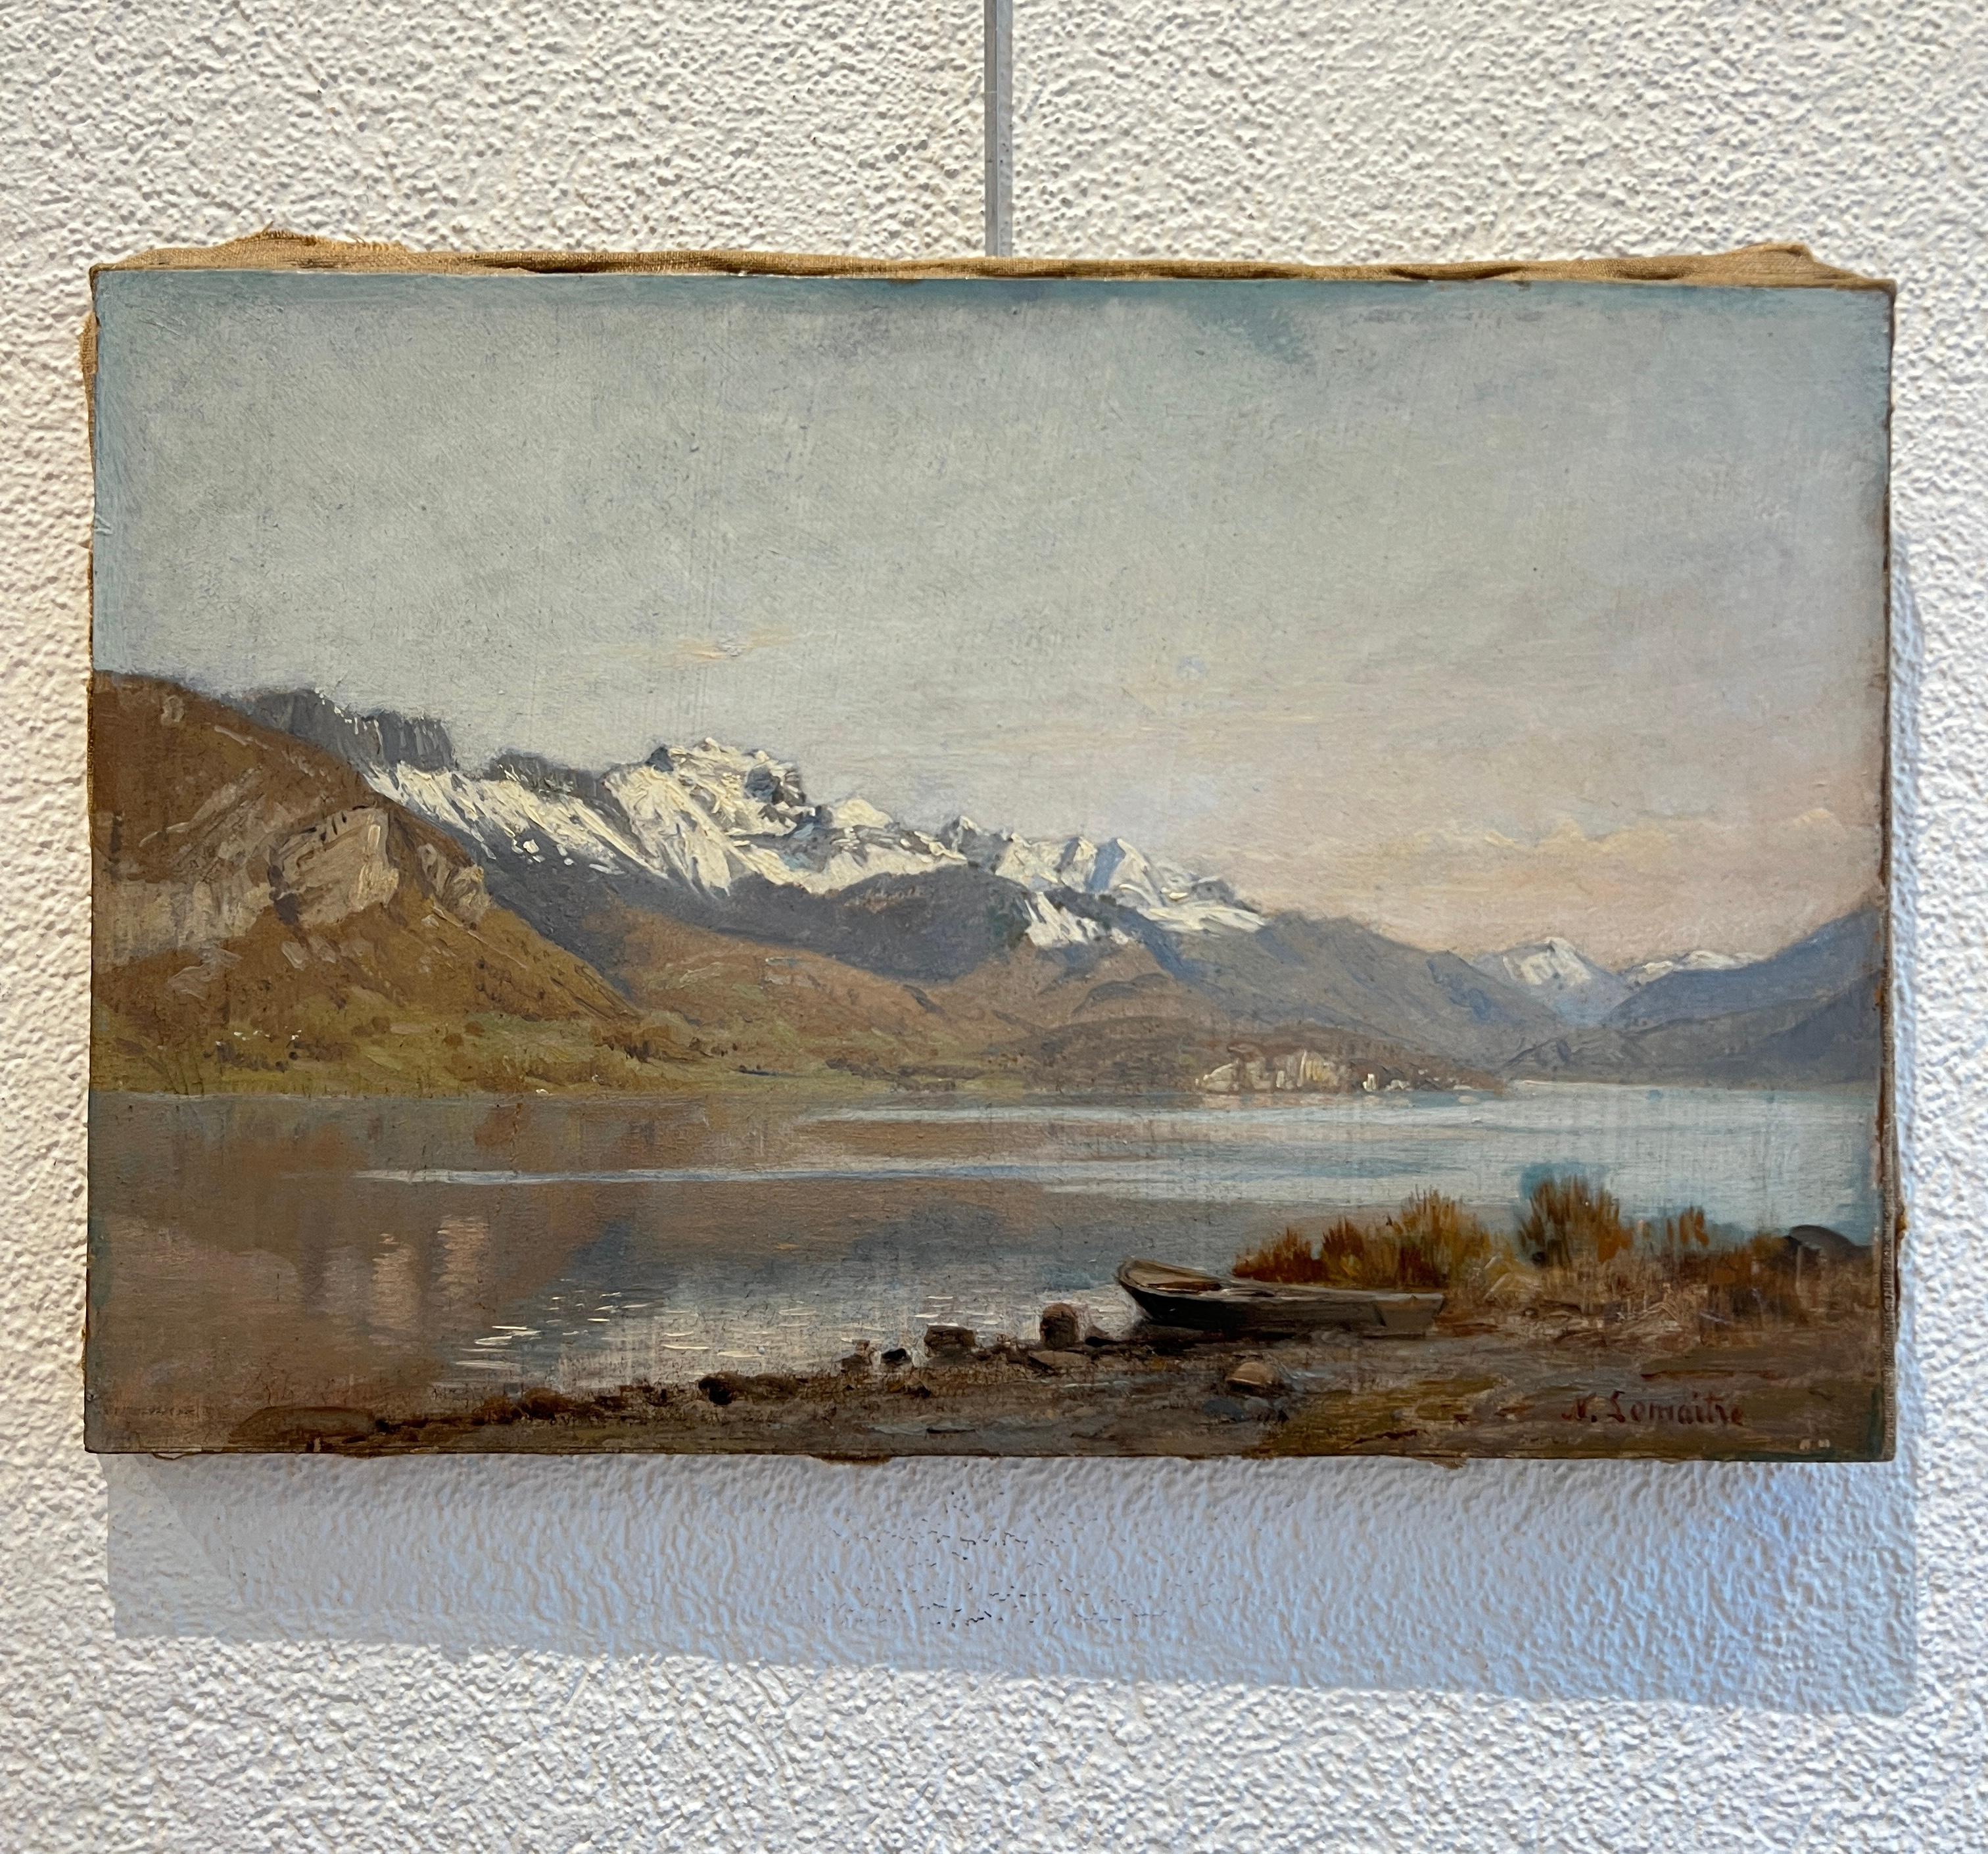 Lake and mountains - Painting by Nathanaël Lemaître